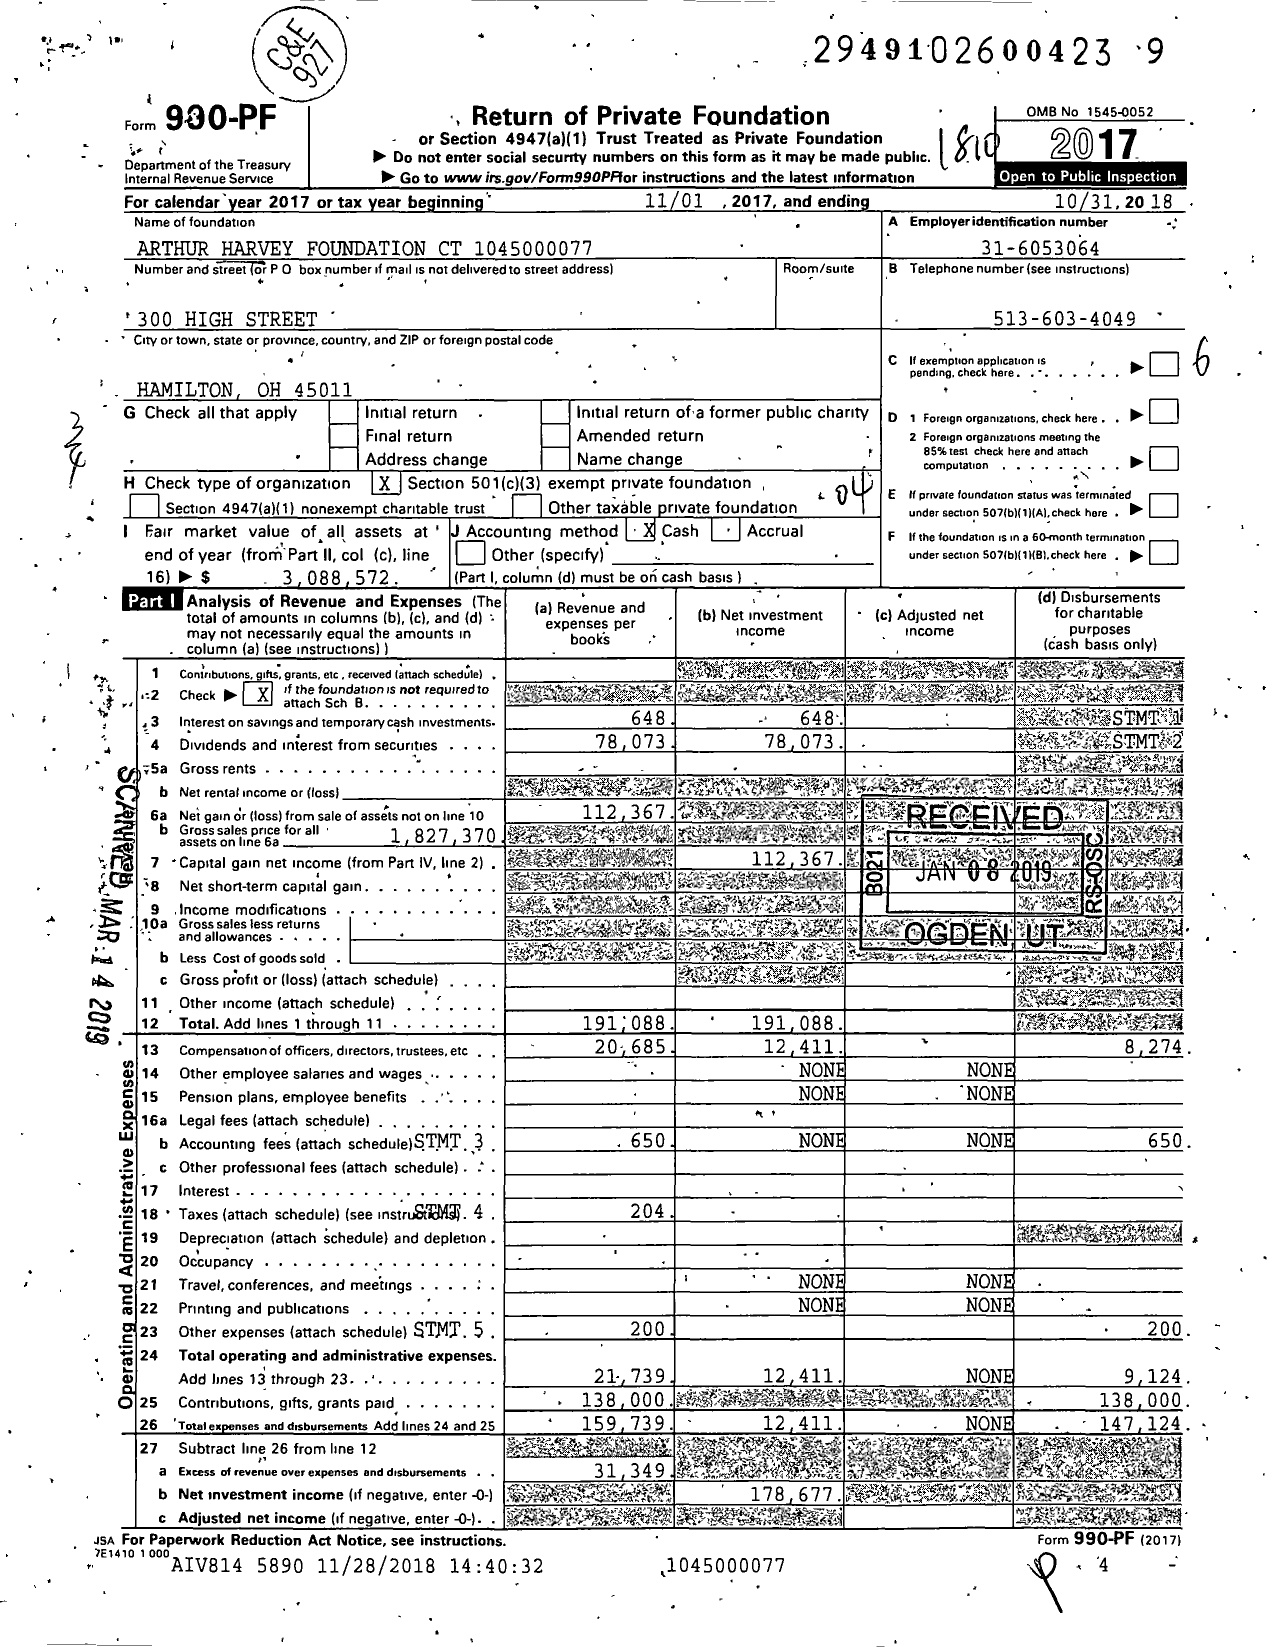 Image of first page of 2017 Form 990PF for Arthur Harvey Foundation CT 1045000077